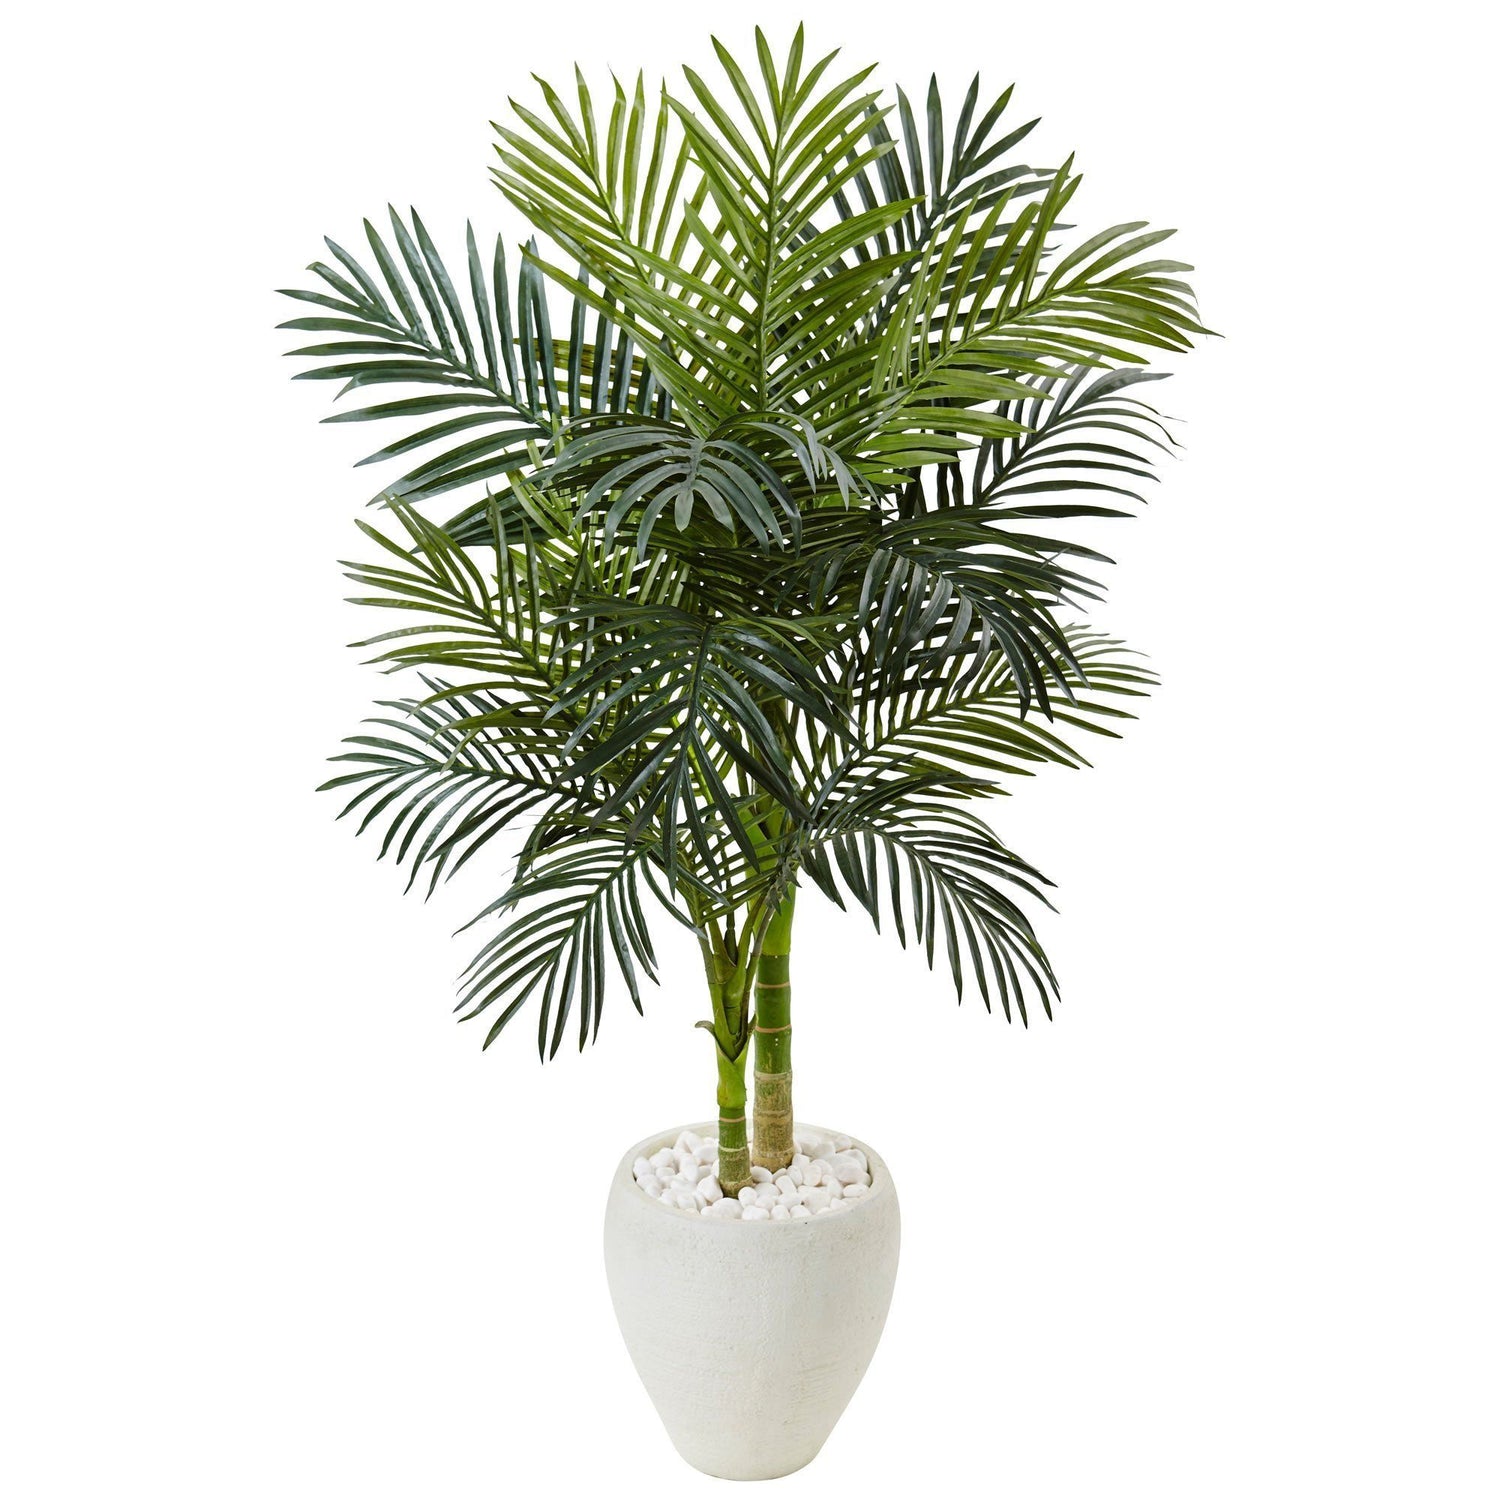 4.5’ Golden Cane Palm Tree in White Oval Planter